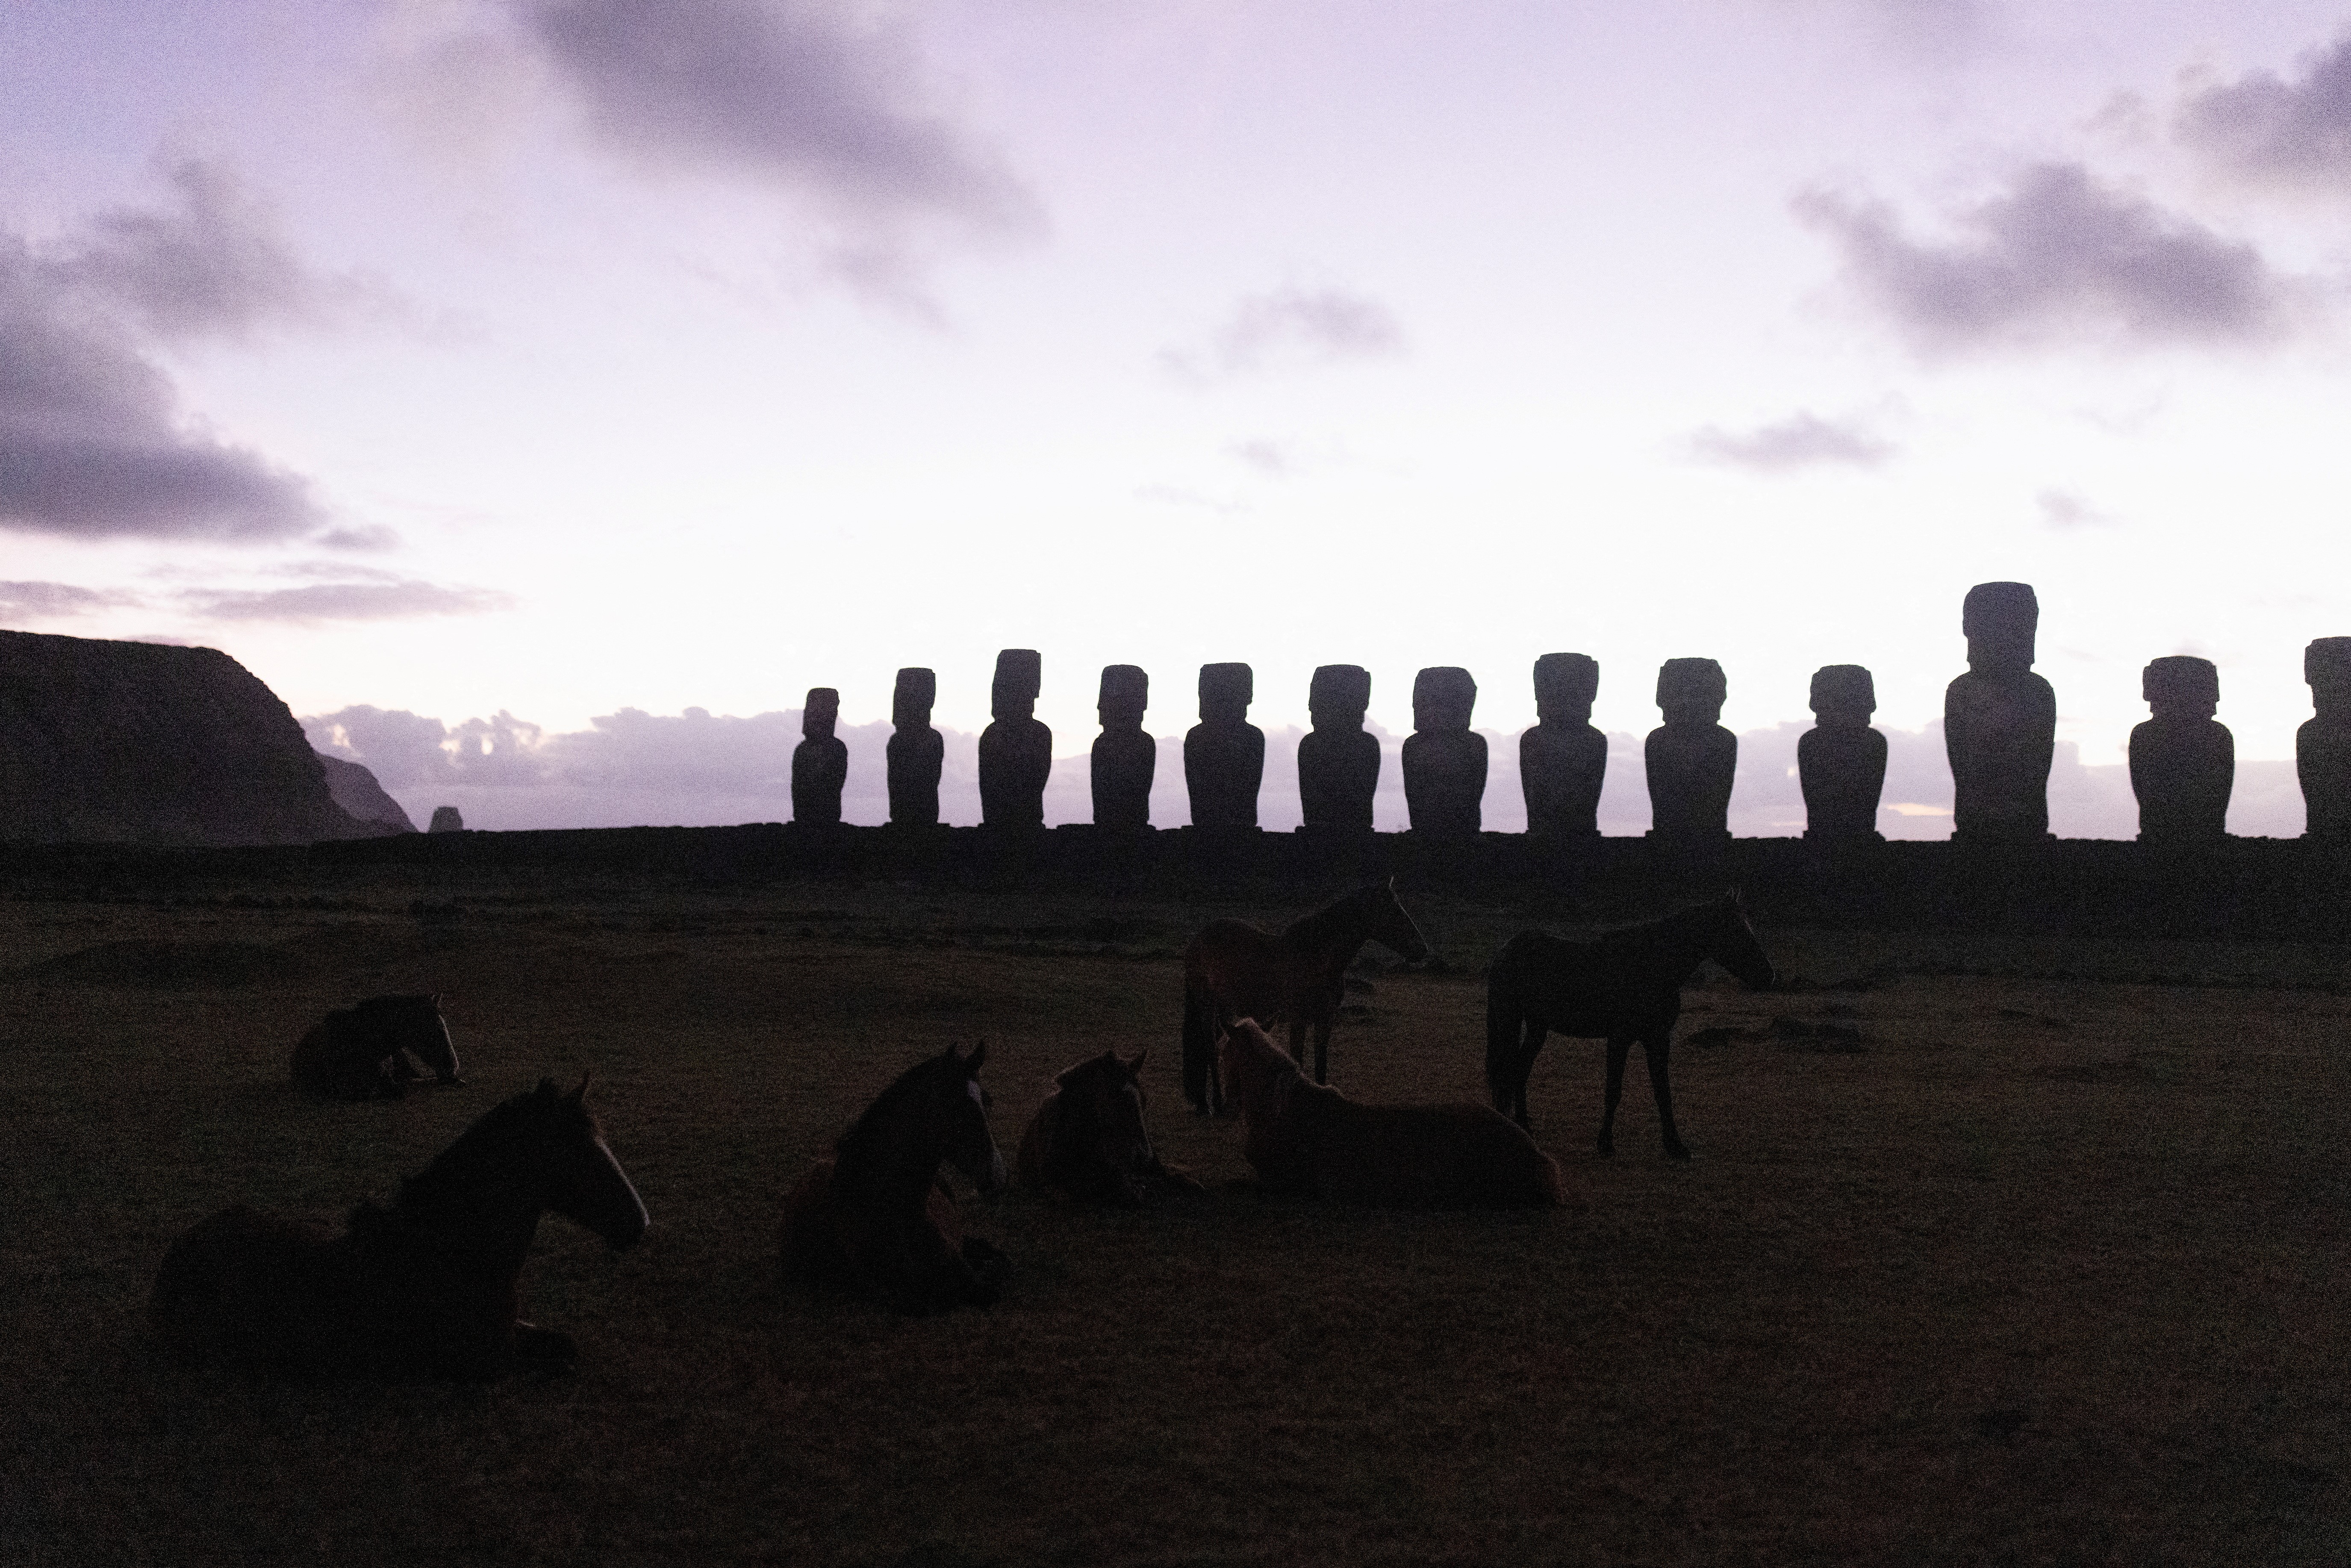 Scientists uncover new Easter Island moai statue in dry lake bed